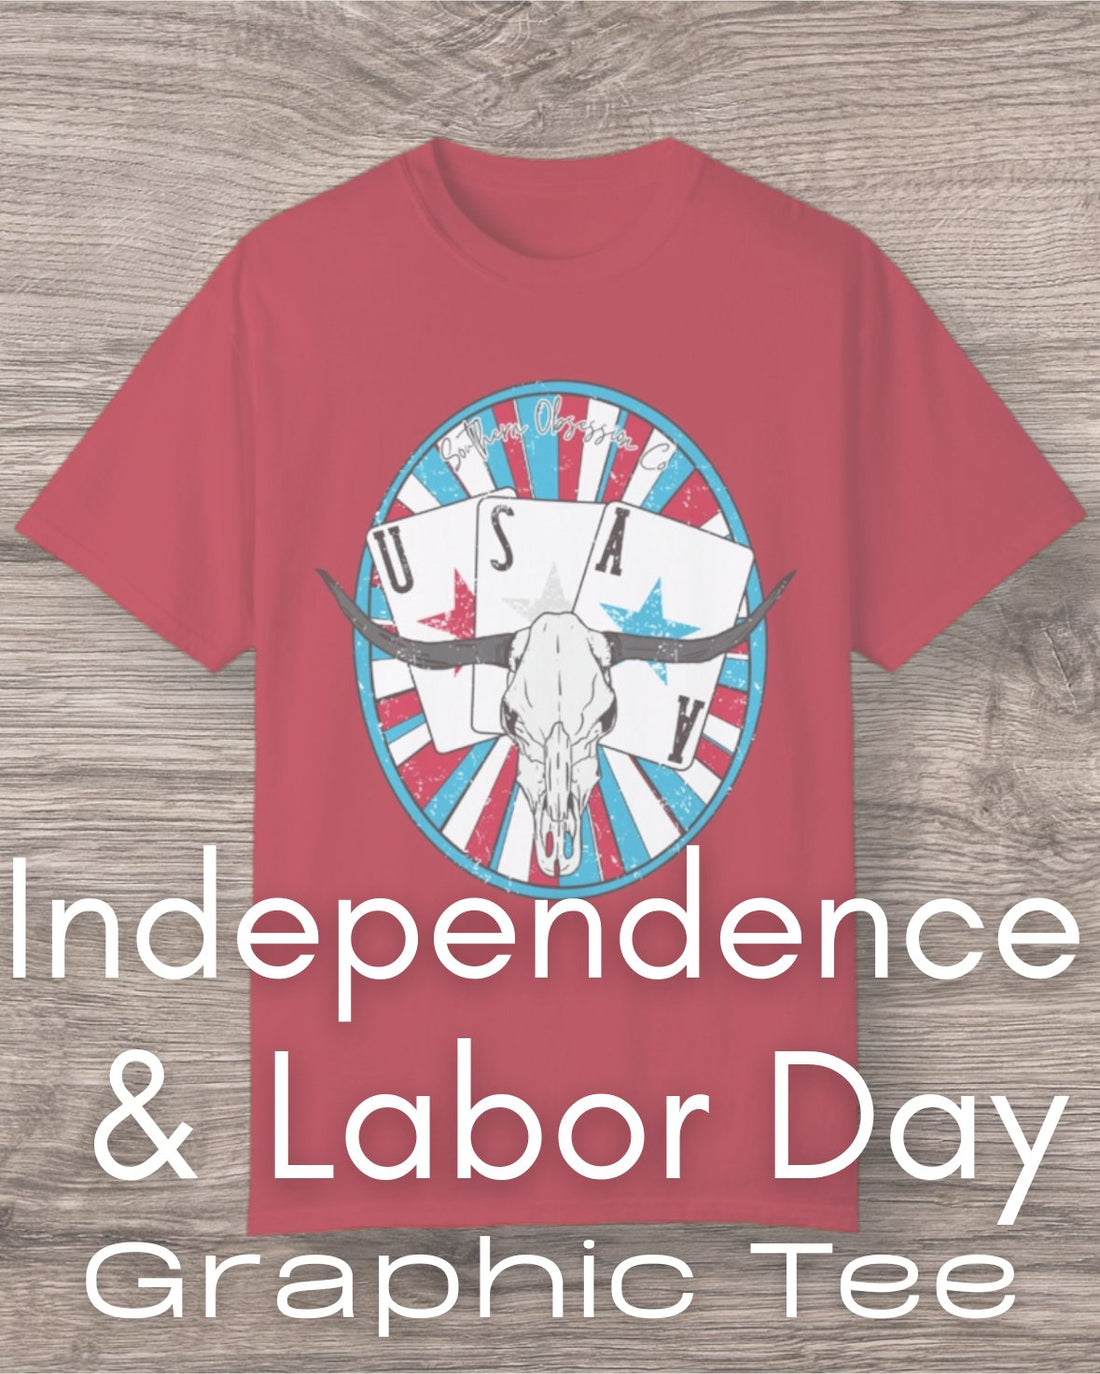  Independence & Labor Day Graphic Tee